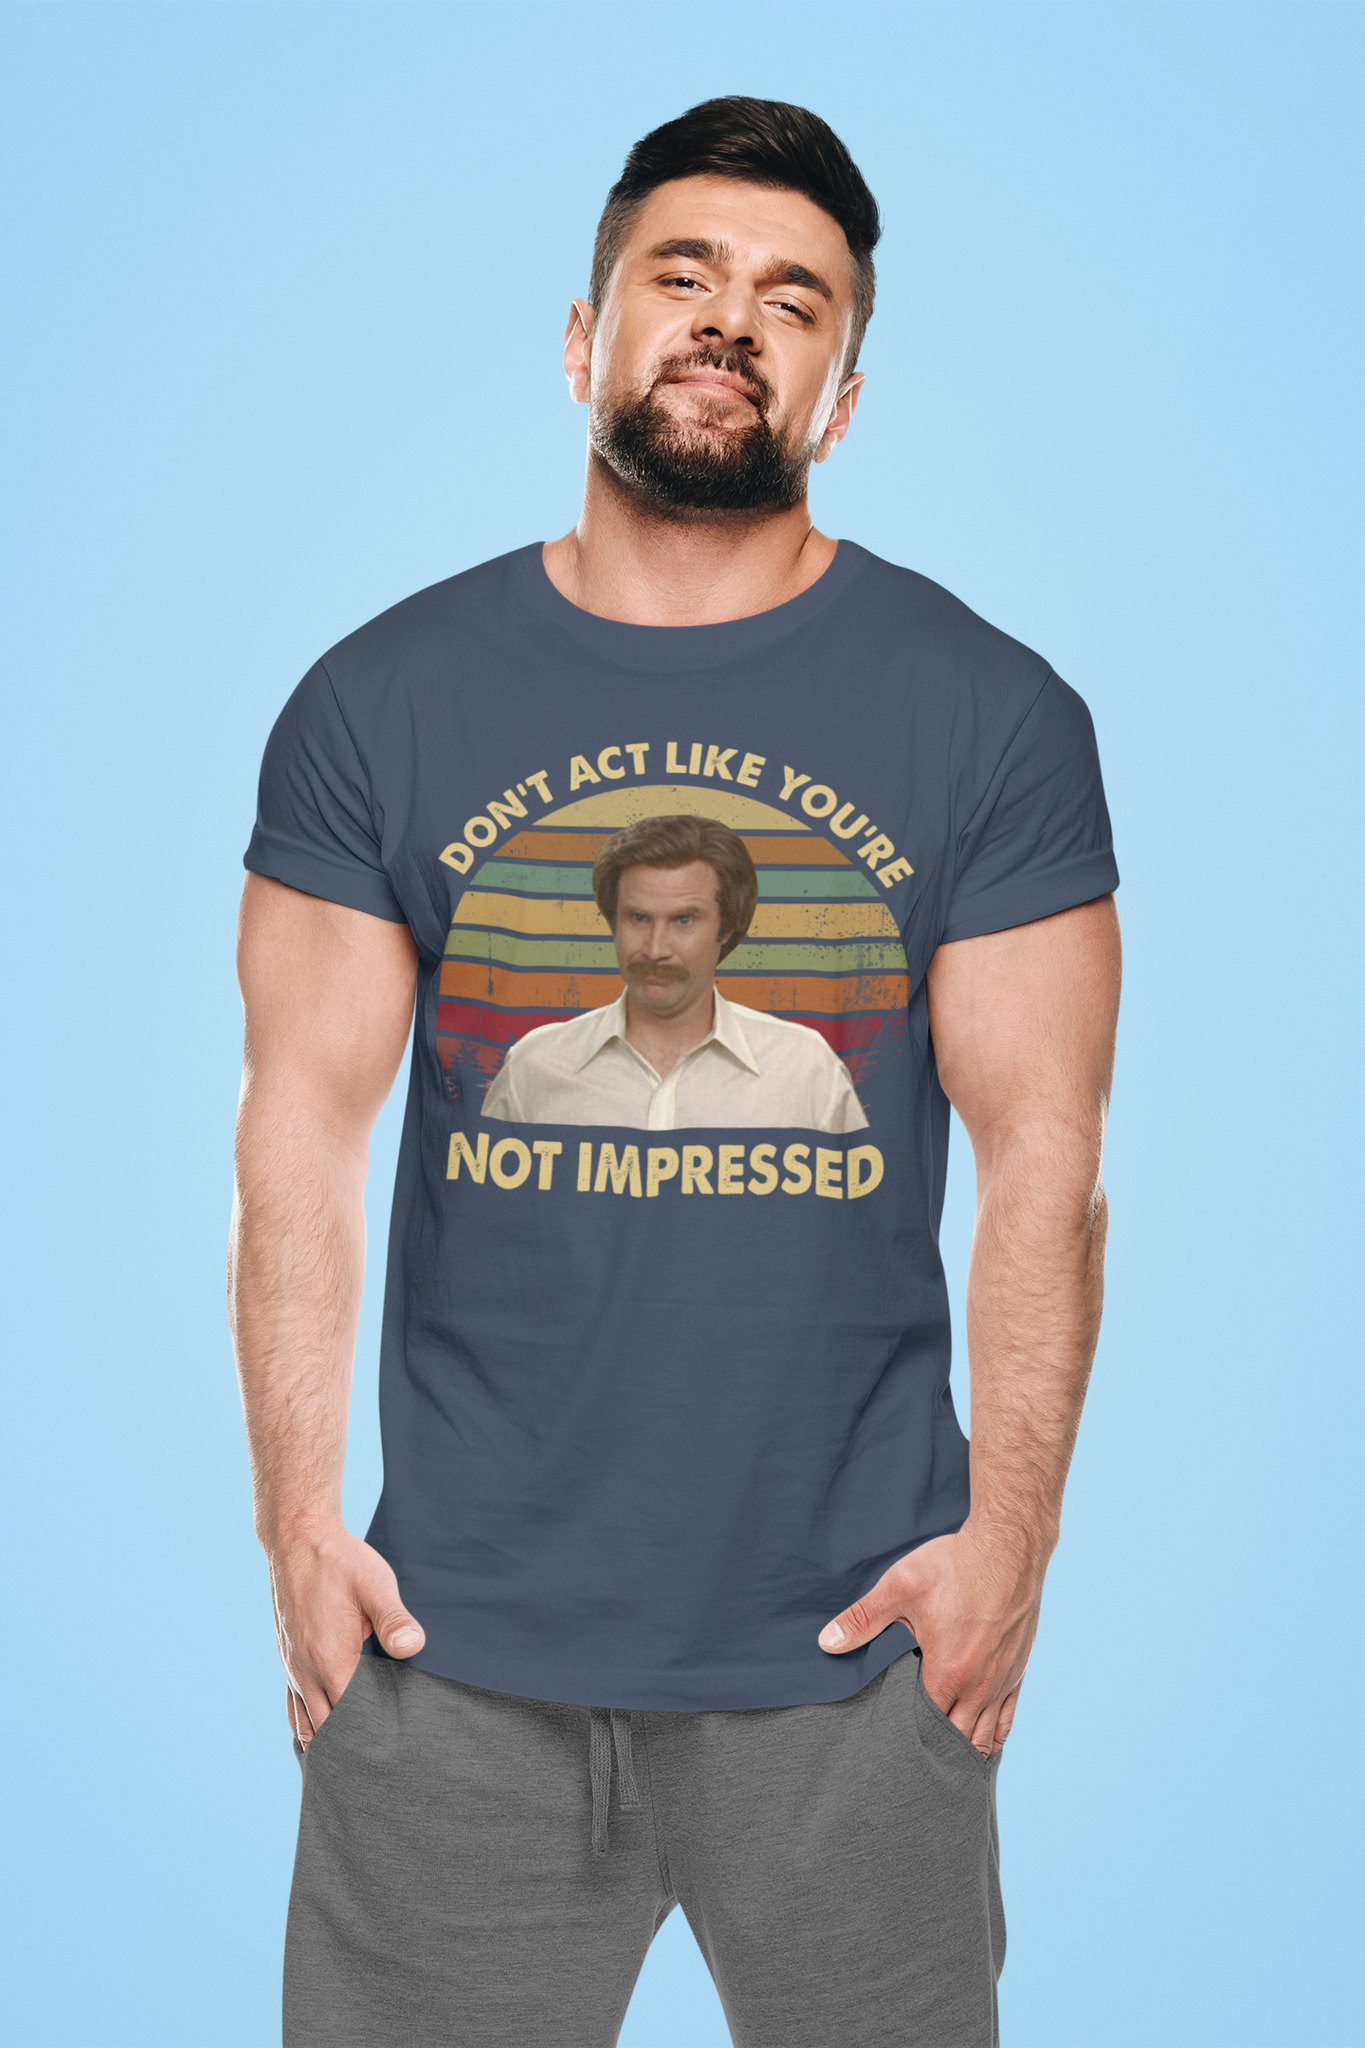 Anchorman Vintage T Shirt, Ron Burgundy T Shirt, Dont Act Like Youre Not Impressed Shirt